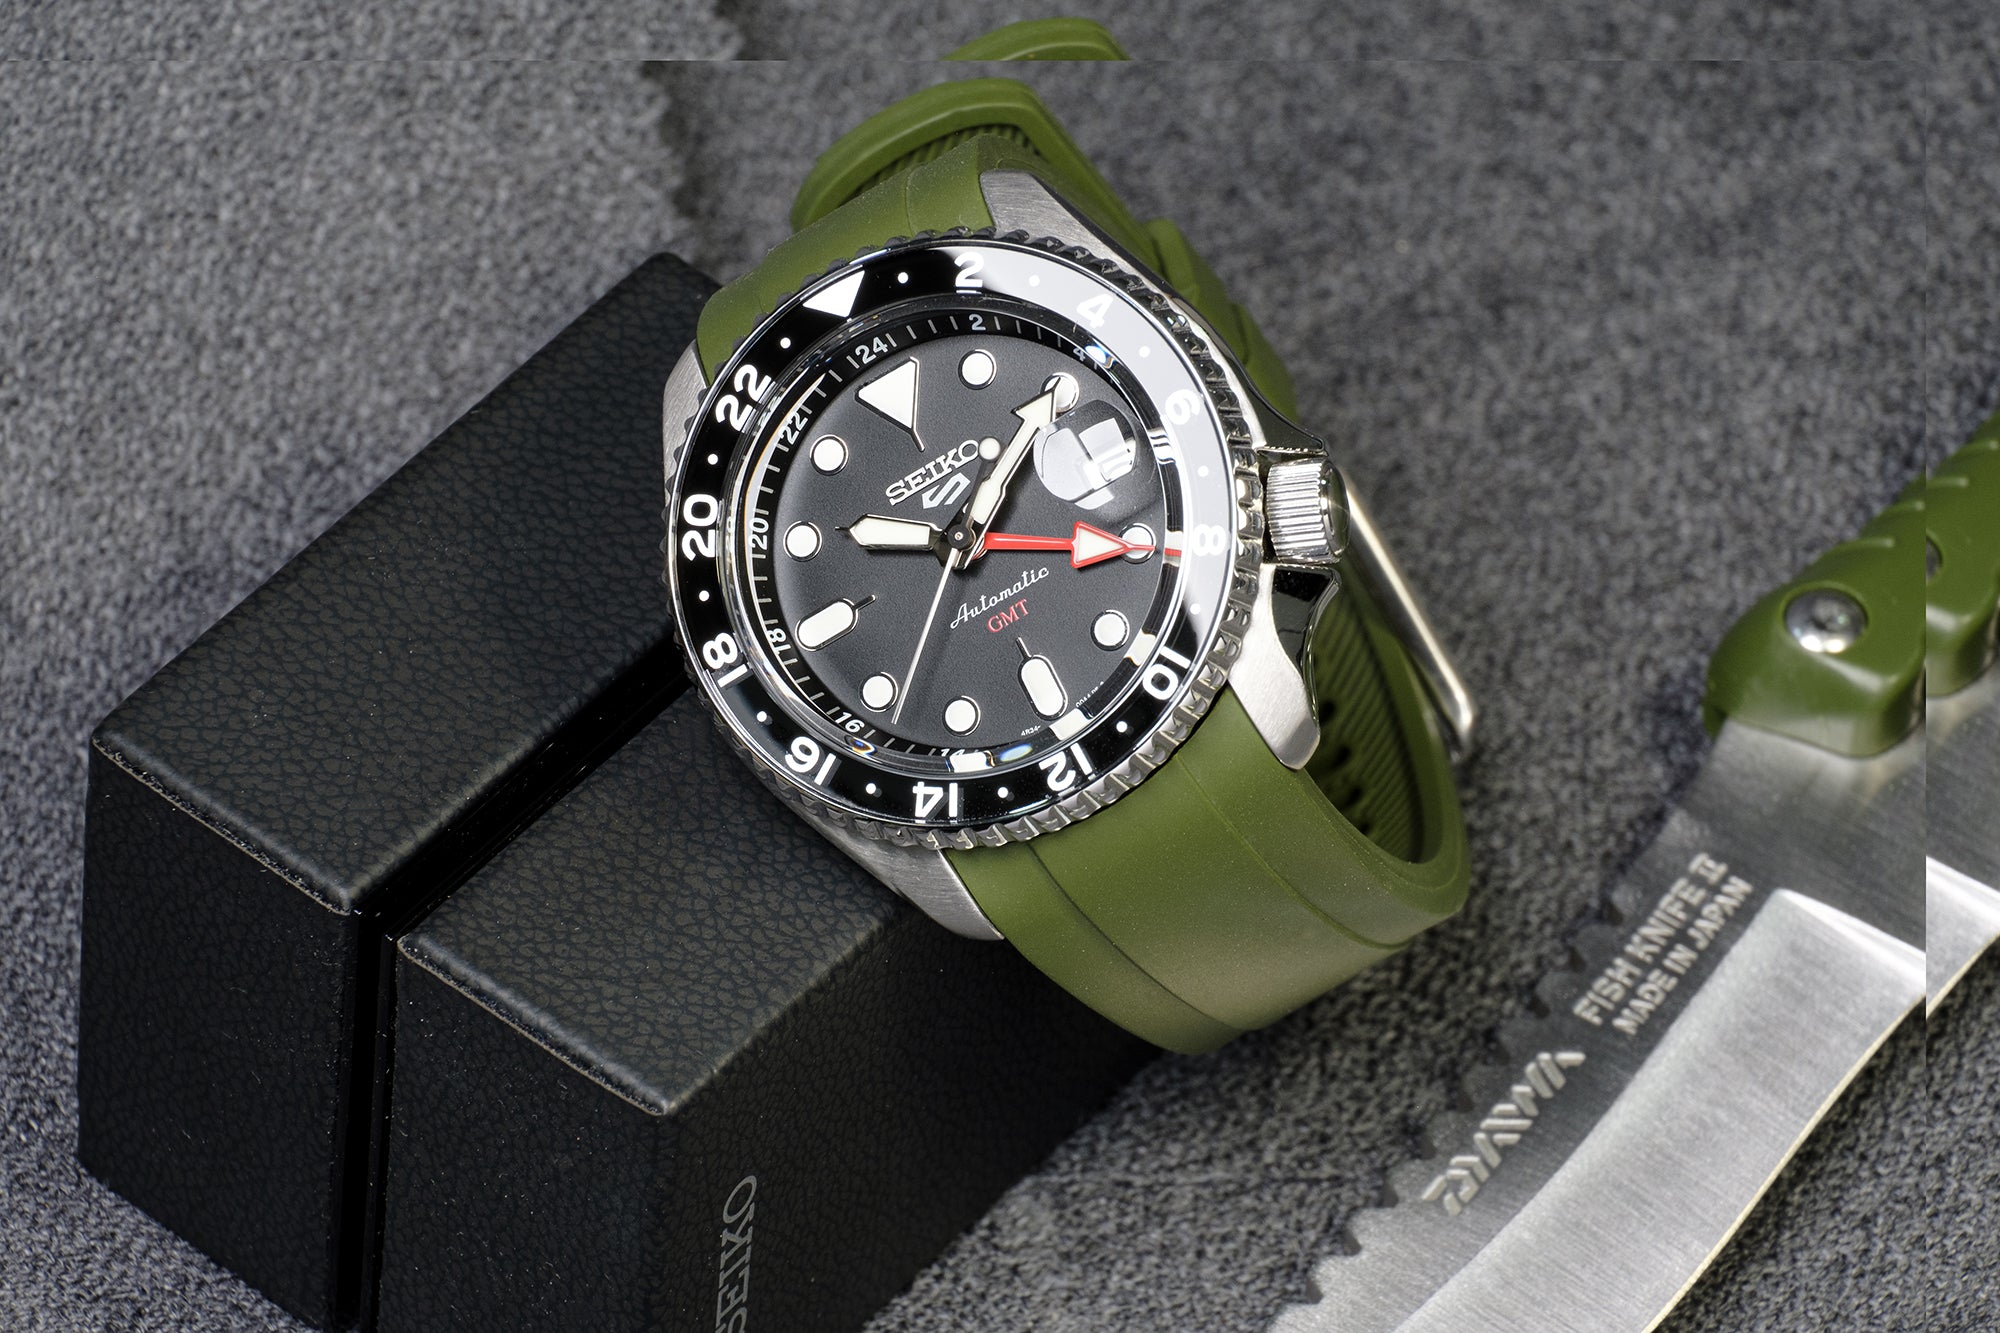 The New Seiko 5 Sports GMT – Crafter Blue